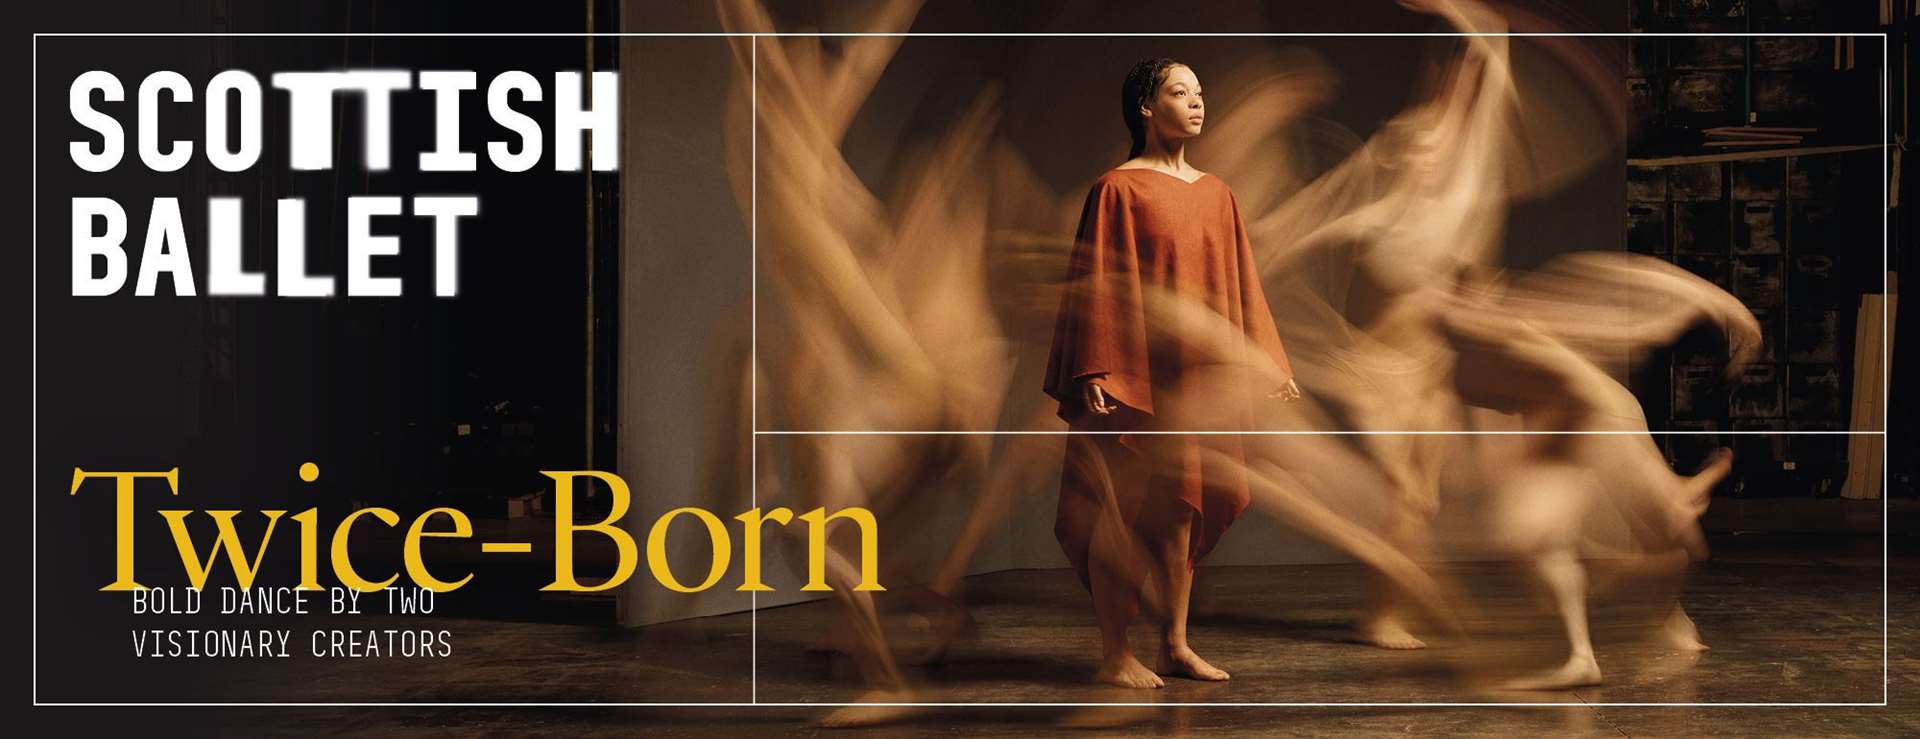 Scottish Ballet will be taking to the stage with Twice Born.